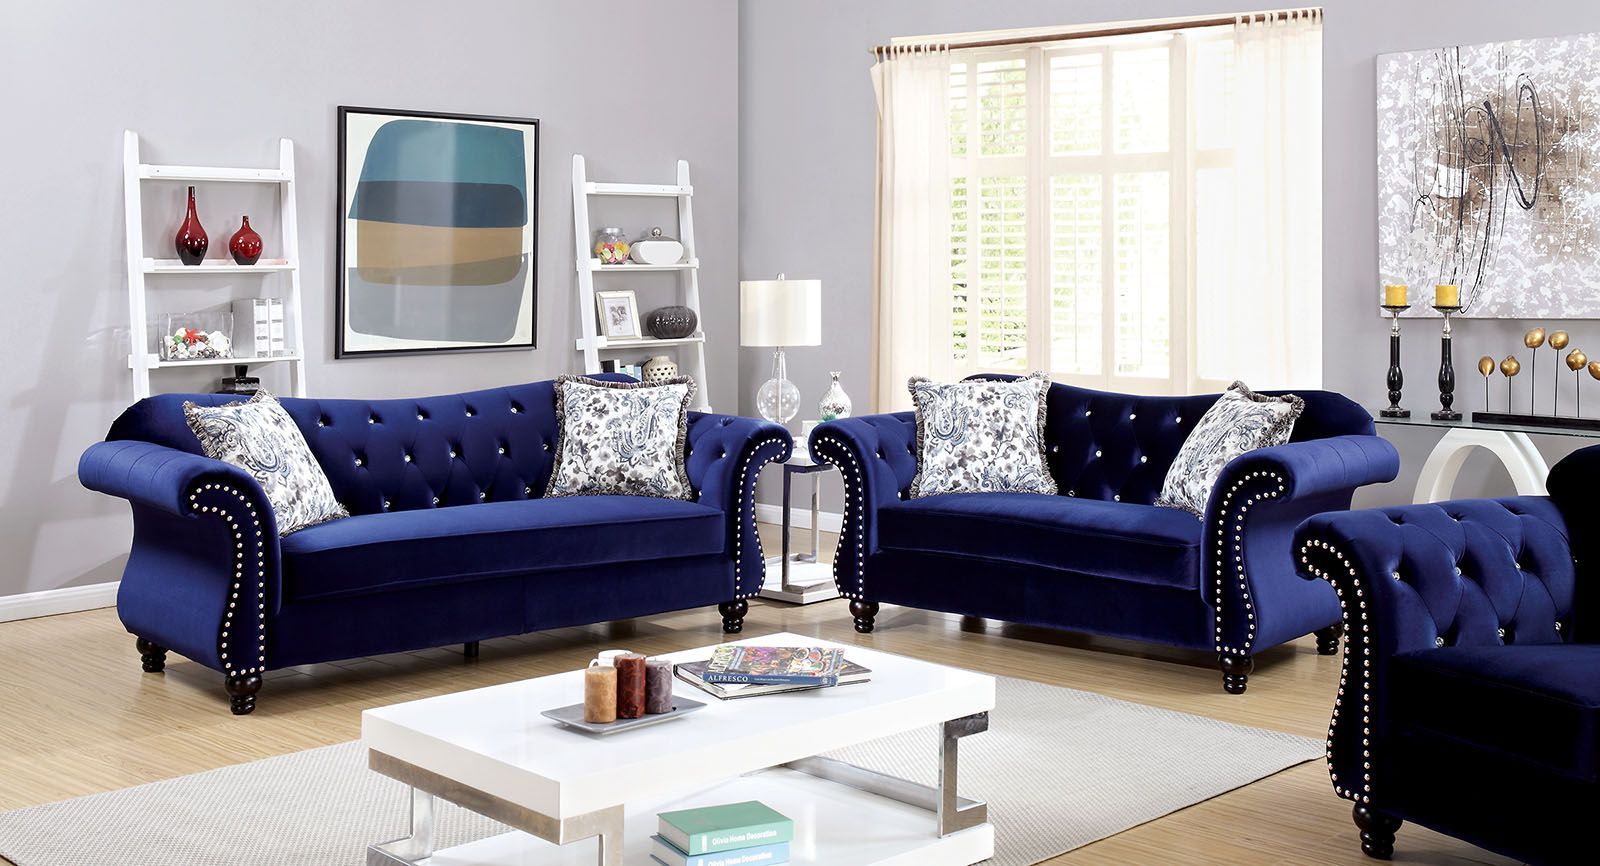 Furniture Of America Jolanda Blue Flannelette Fabric With Molnar Upholstered Sectional Sofas Blue/gray (View 12 of 15)